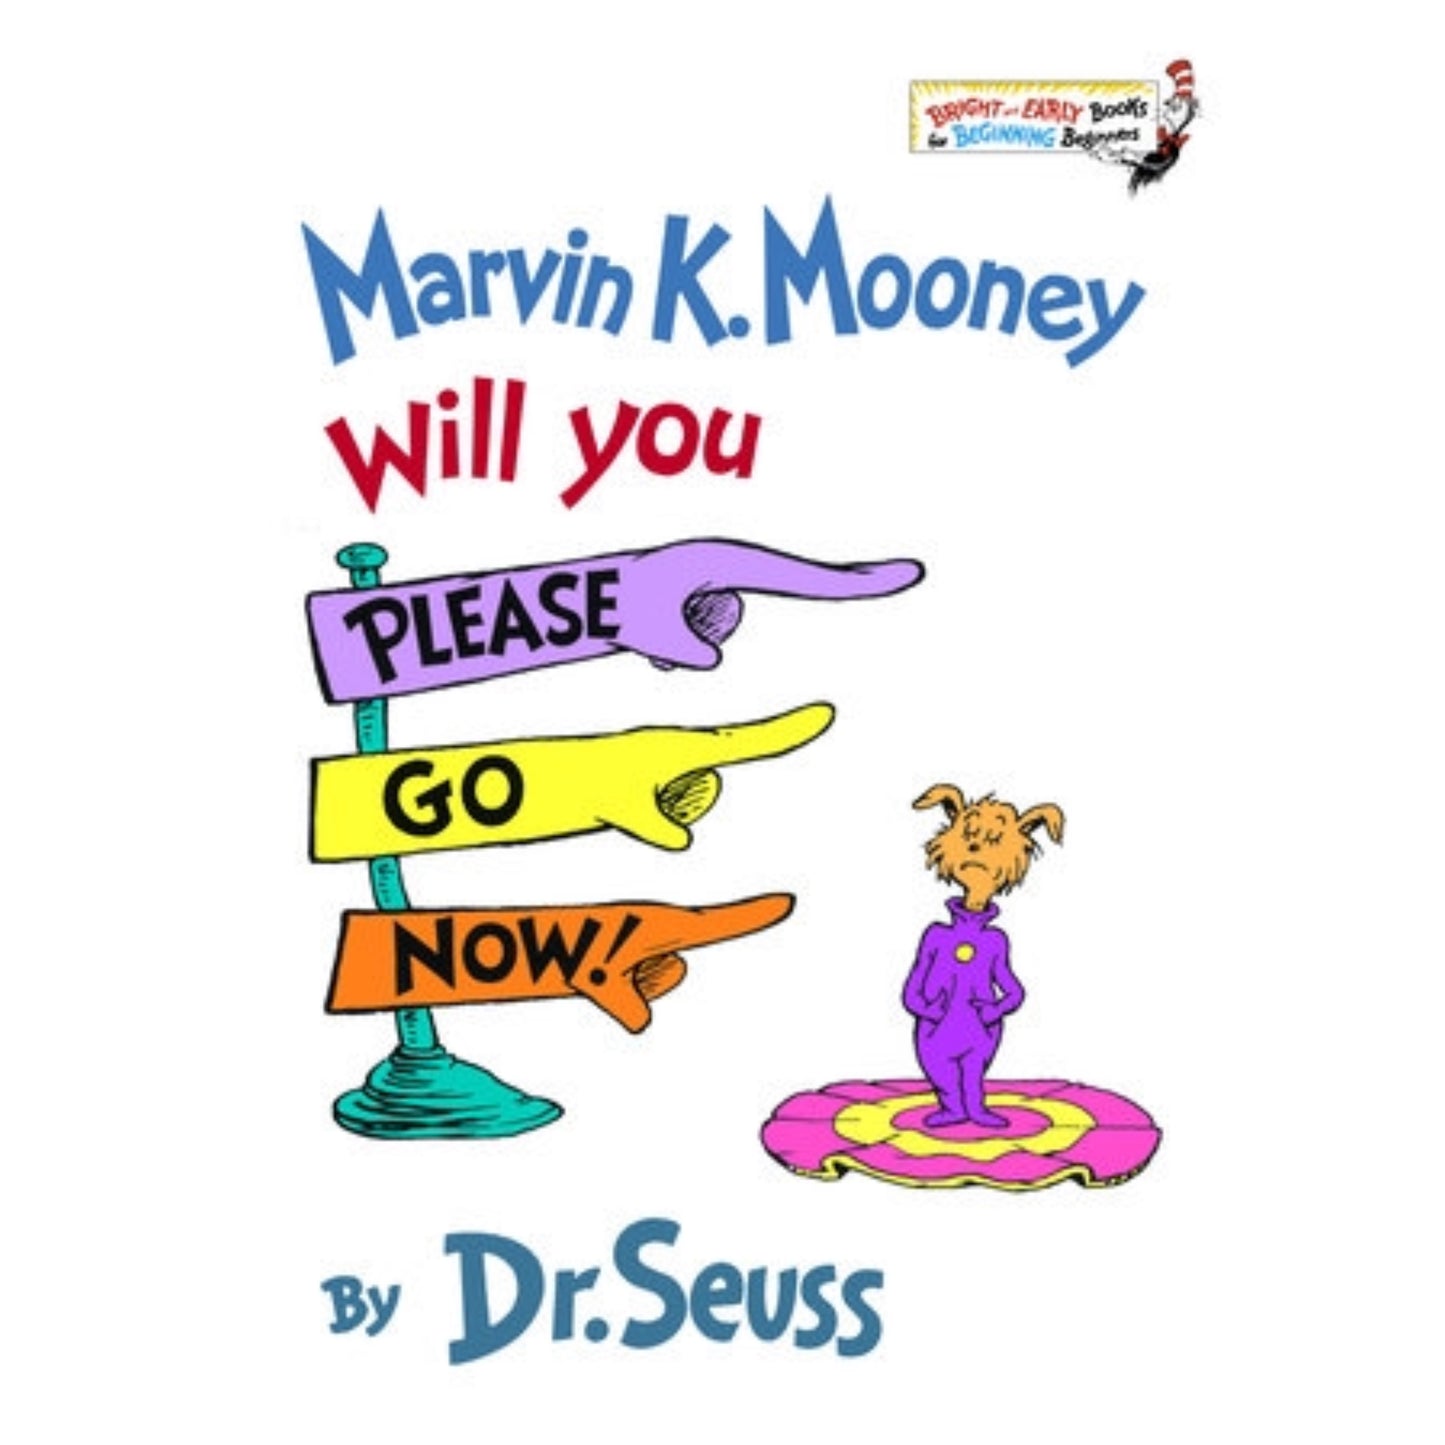 Marvin K Mooney Will You Please Go Now! by Dr. Seuss